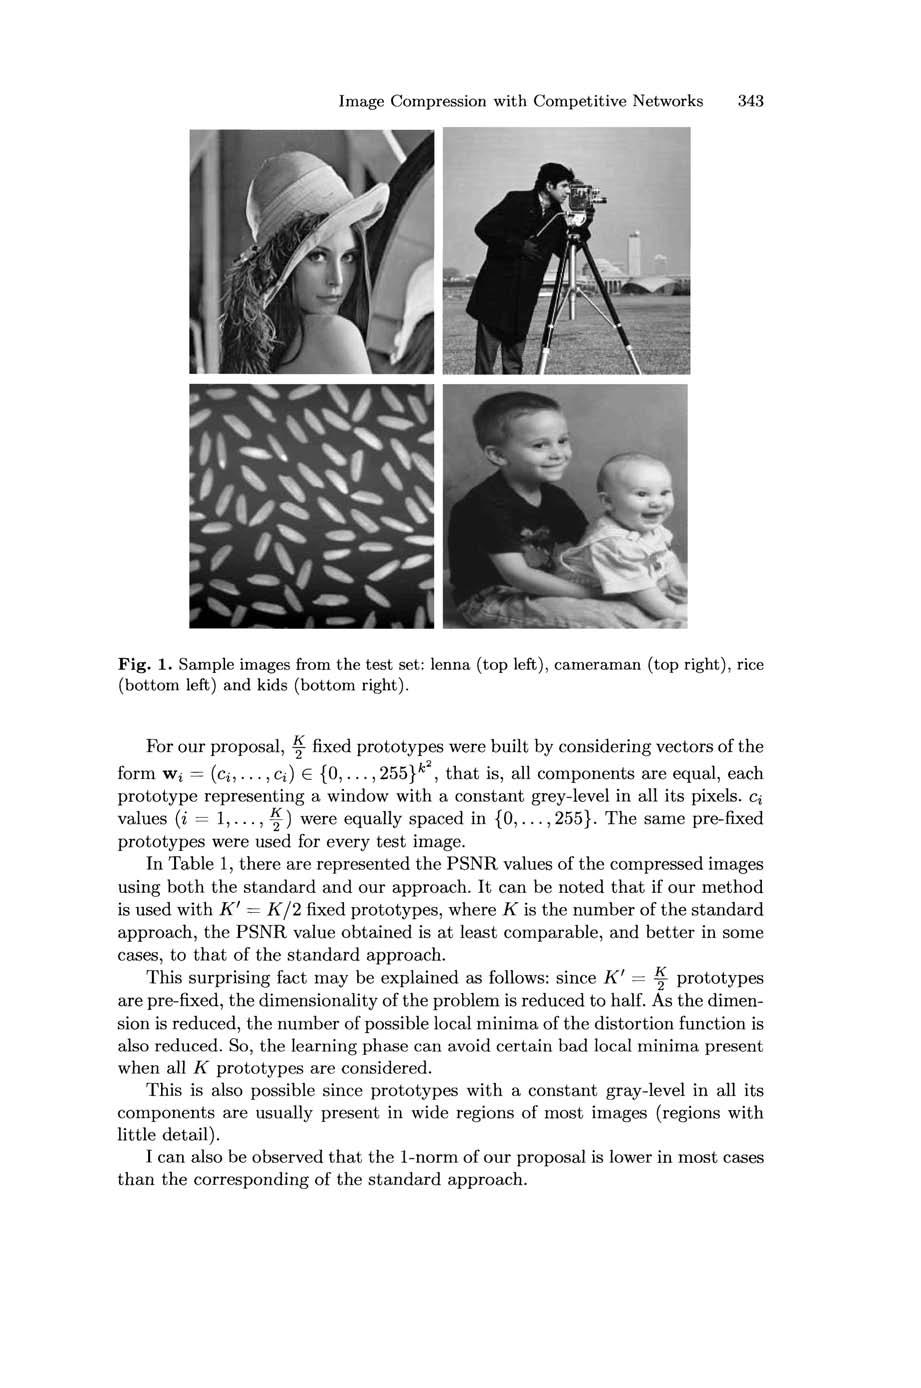 Image Compression with Competitive Networks 343 Fig. 1. Sample images from the test set: lenna (top left), cameraman (top right), rice (bottom left) and kids (bottom right).